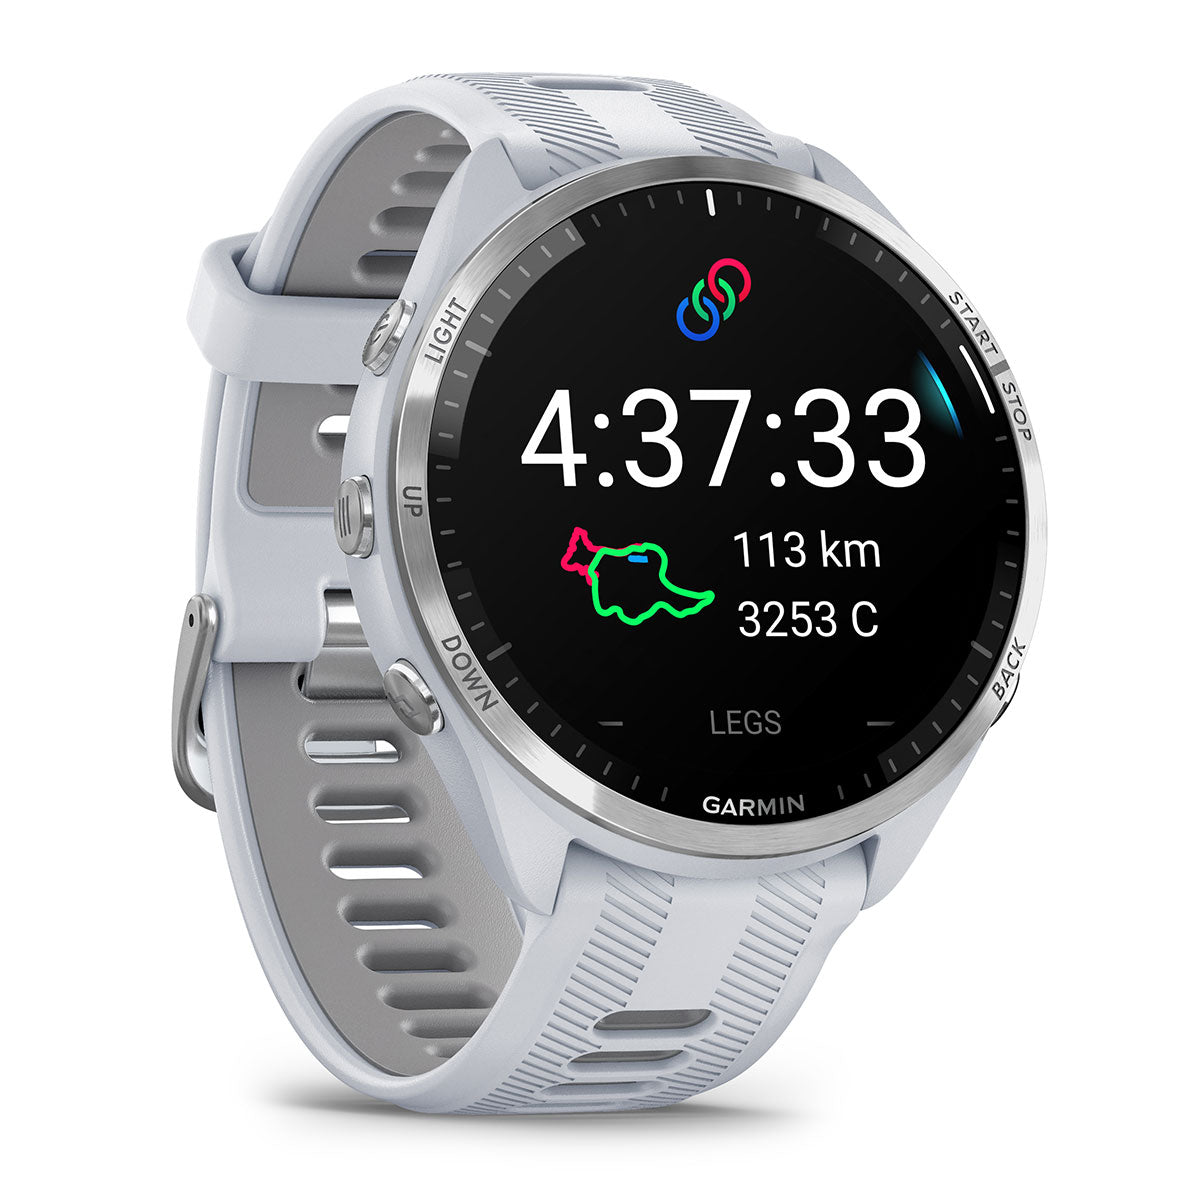 Garmin Forerunner 965 (Whitestone/Gray) Premium Running & Triathlon GPS Smartwatch | Bundle with PlayBetter Screen Protectors & Portable Charger - image 5 of 6